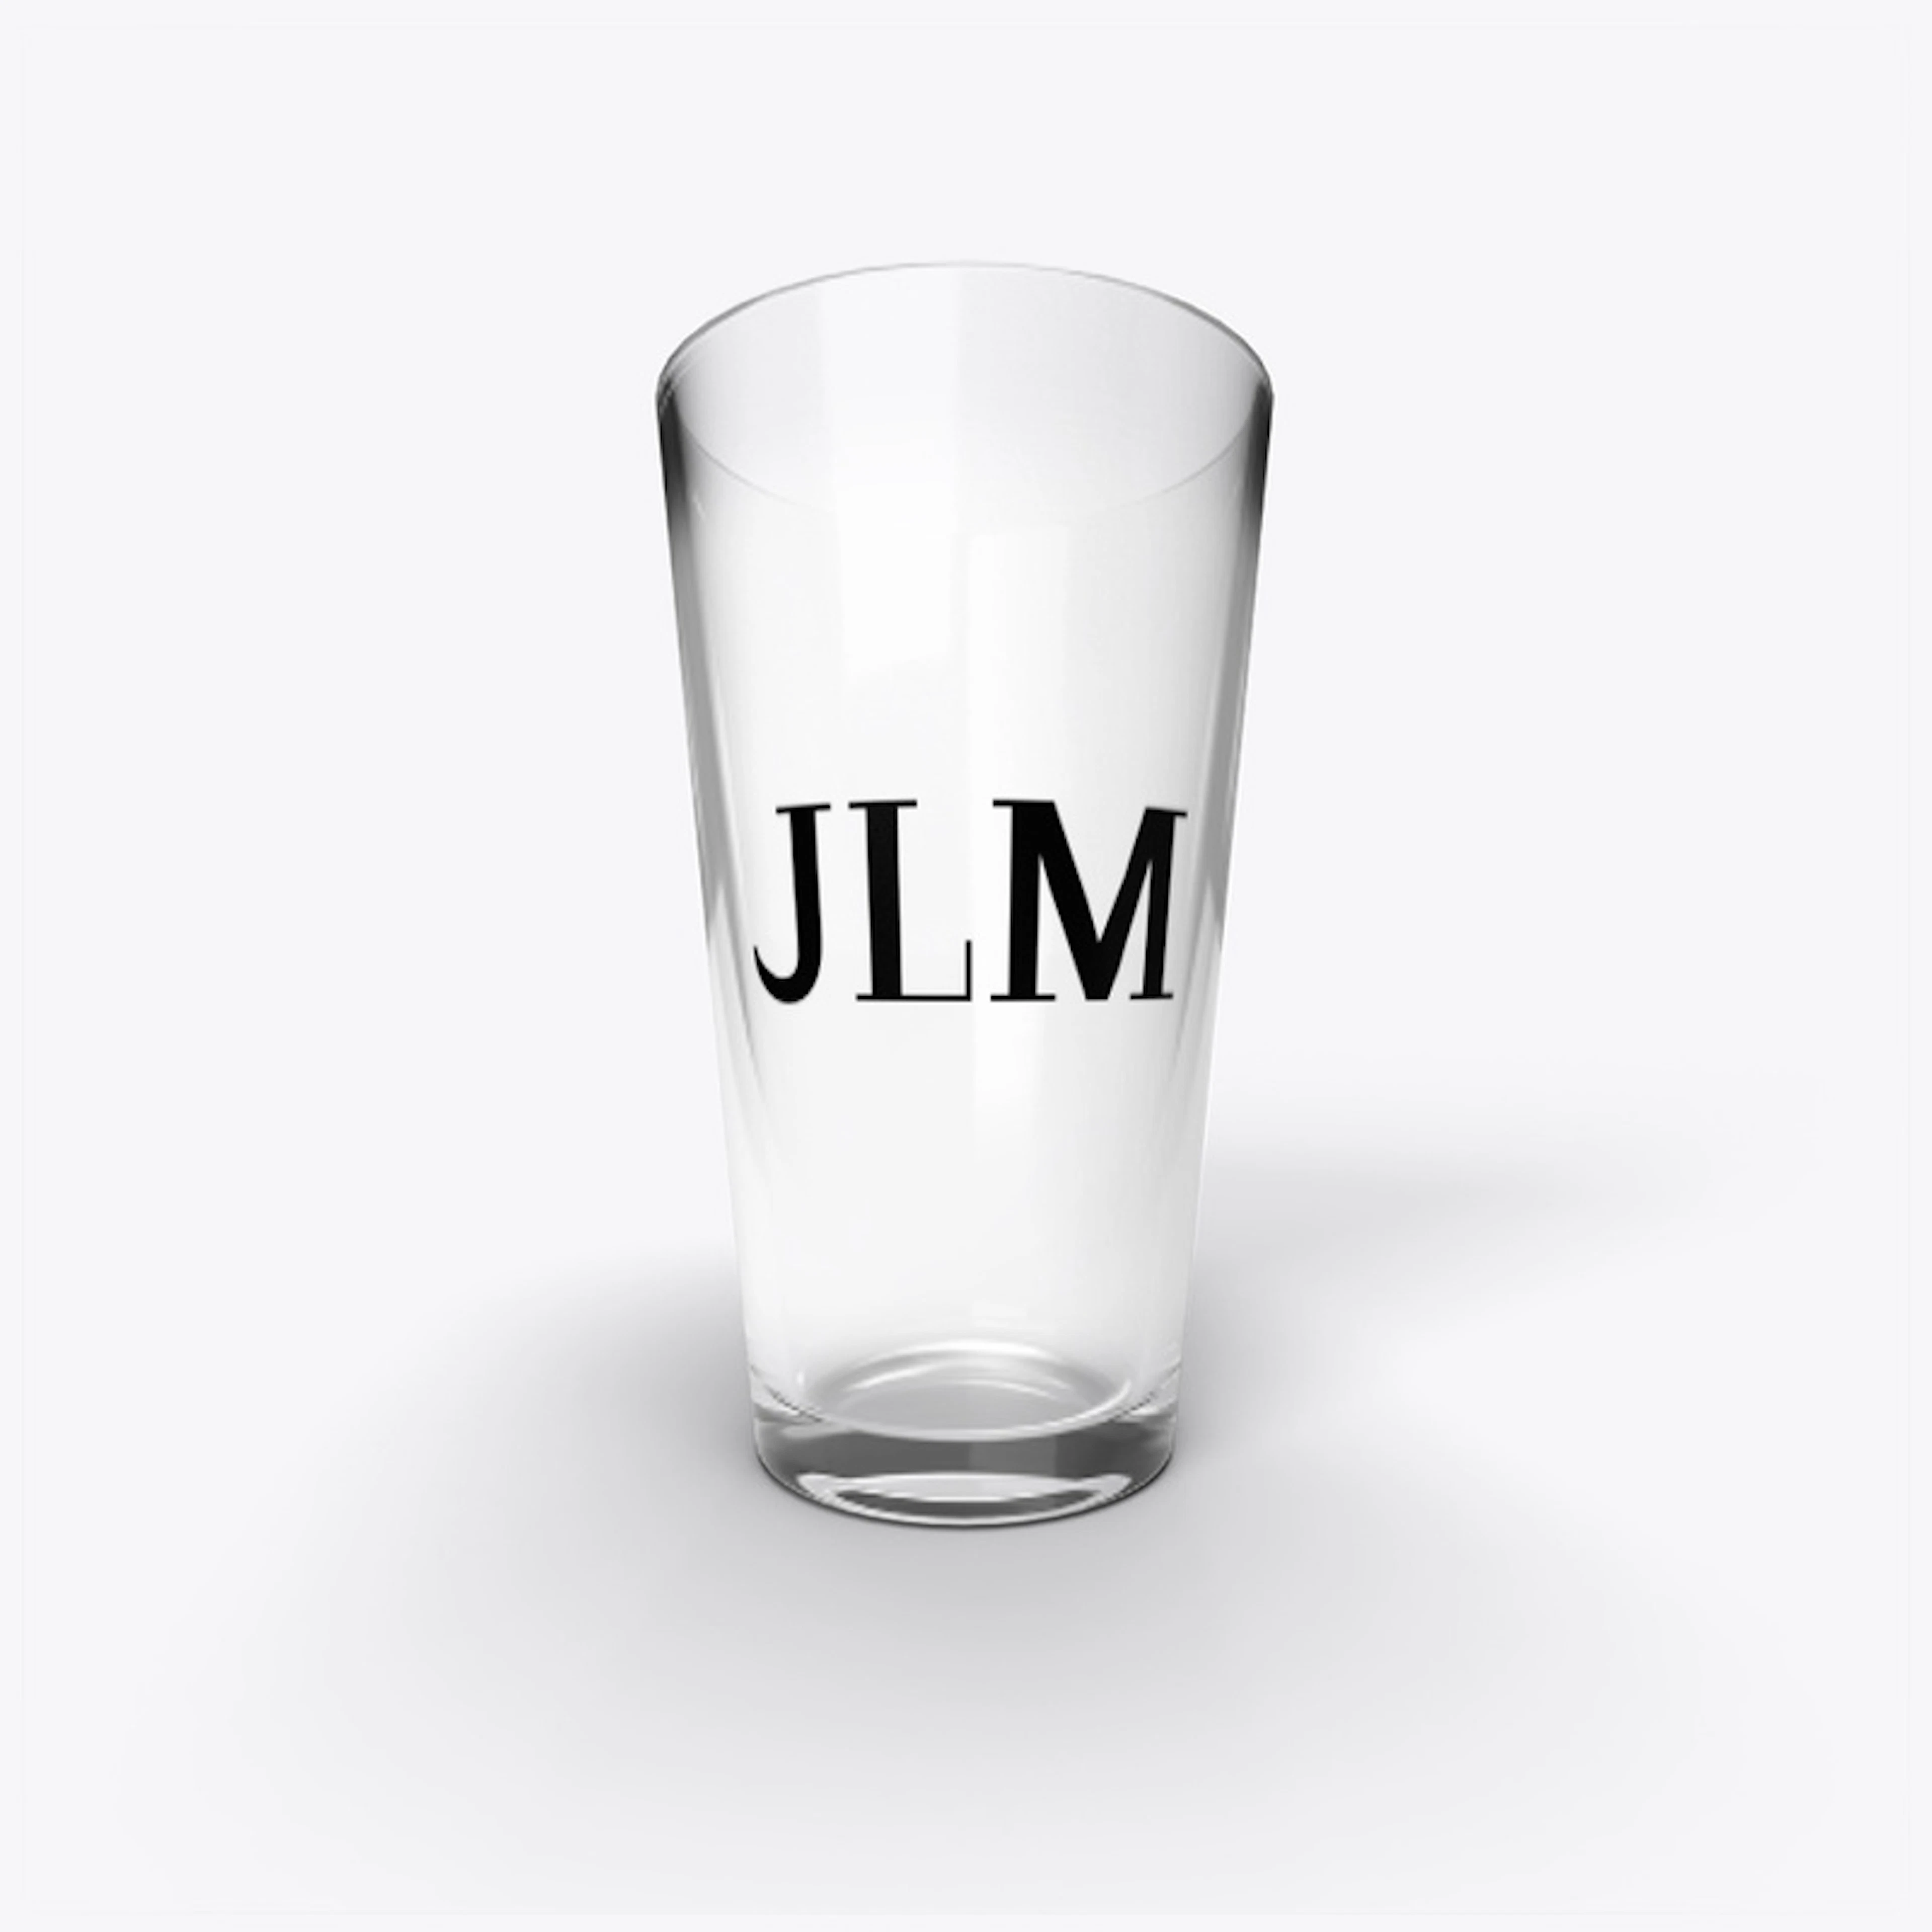 The JLM Collection